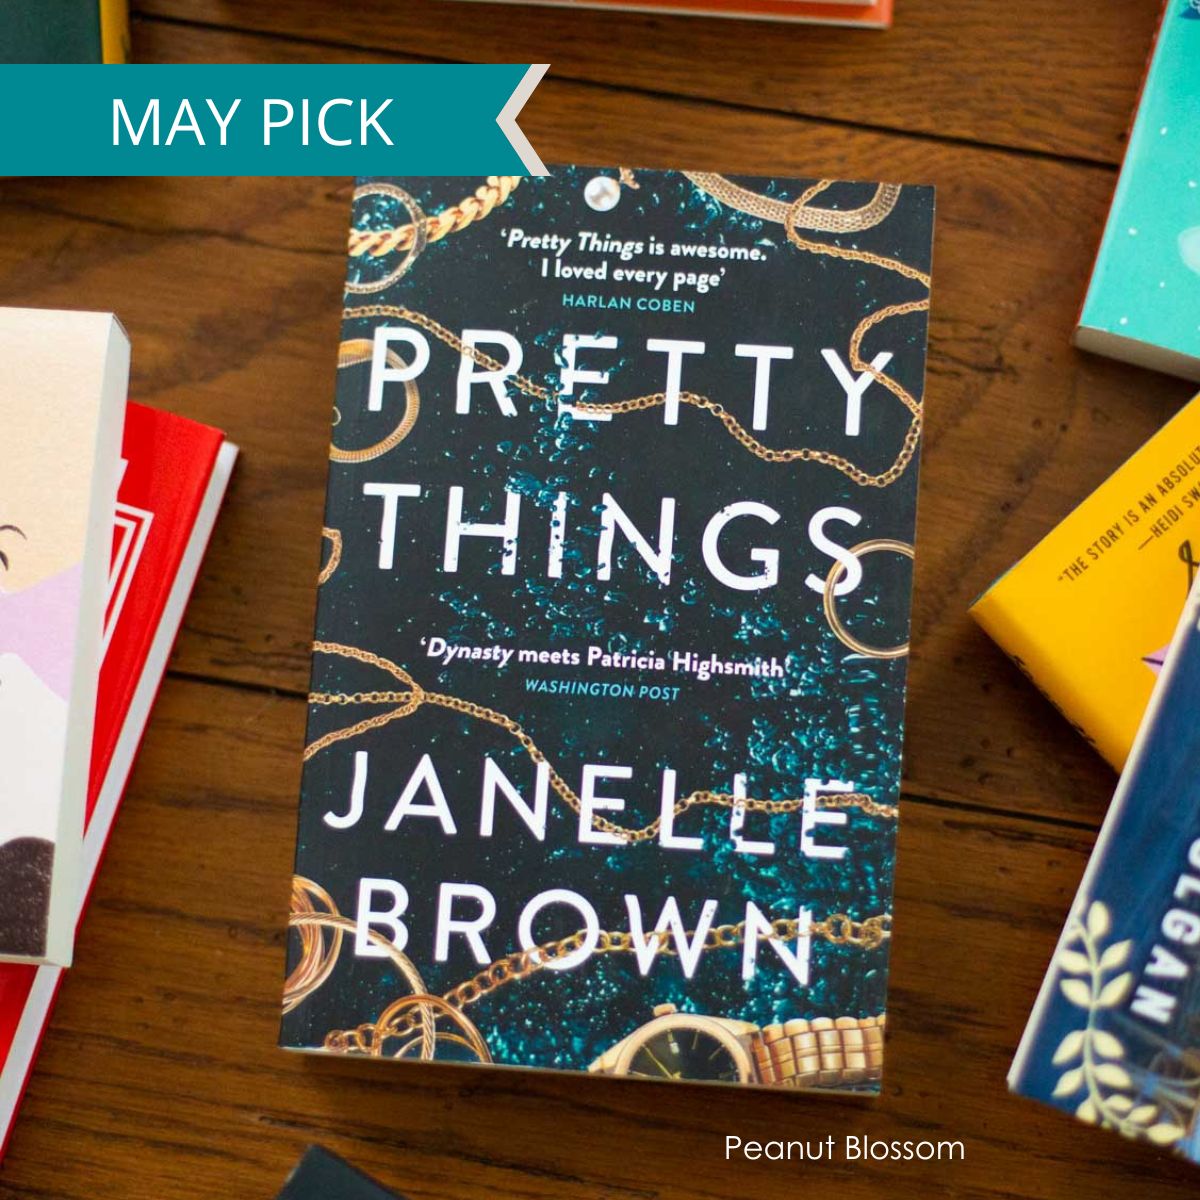 A copy of Pretty Things by Janelle Brown sits on the table.